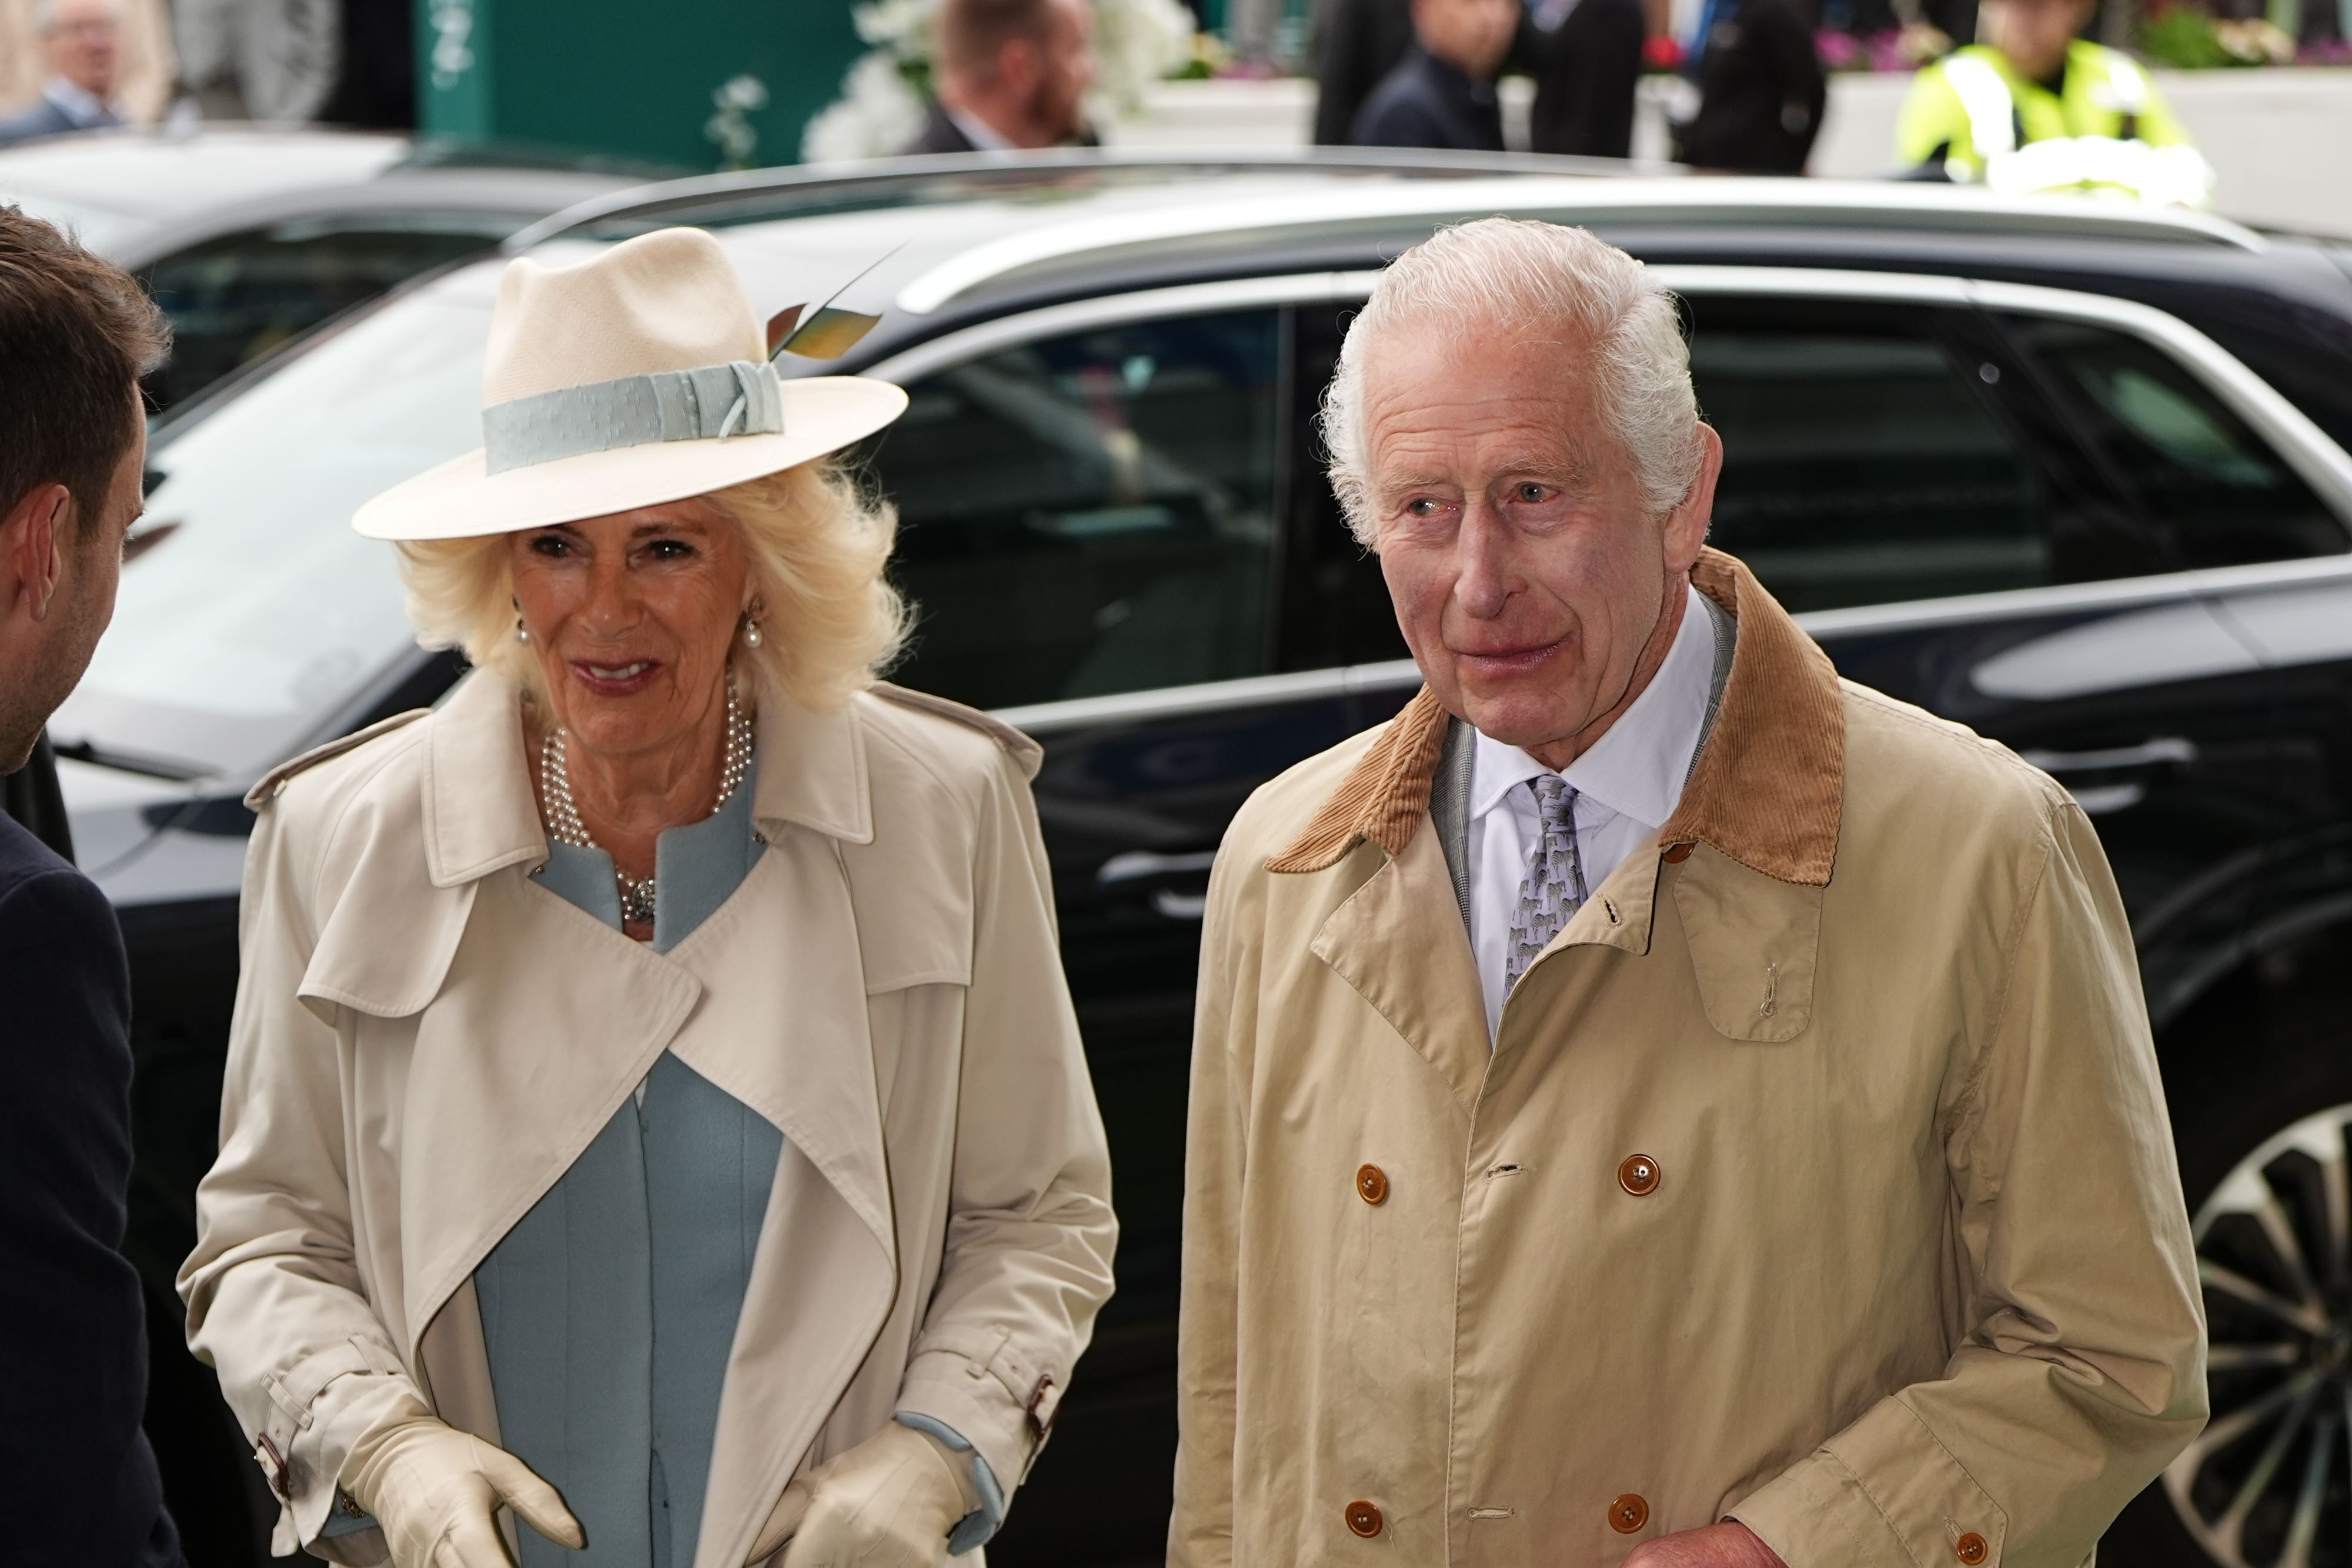 The King and Queen attend the Derby Festival in Epsom (Aaron Chown/PA)